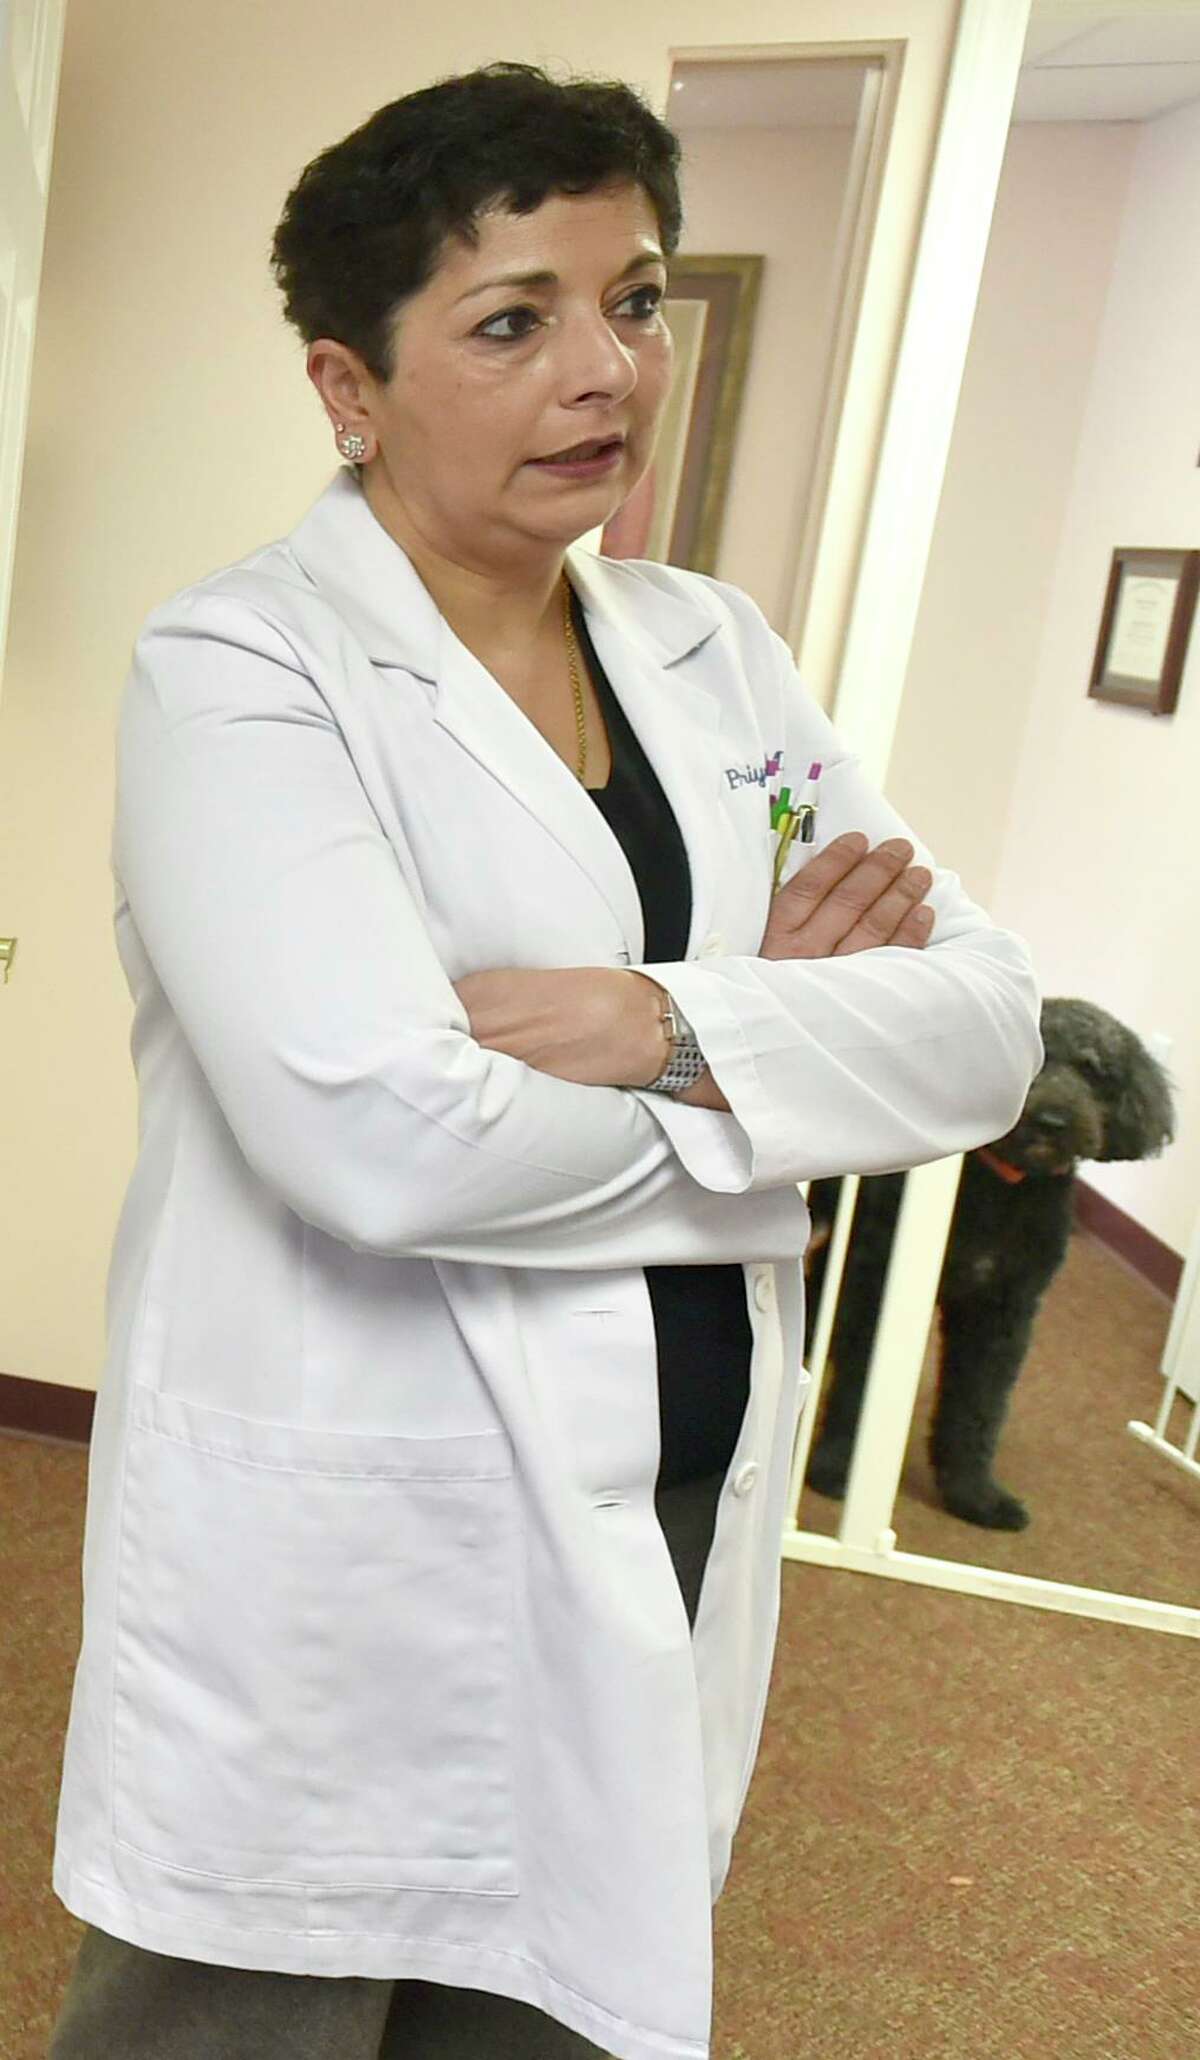 Colchester, Connecticut - Tuesday, January 14, 2020: Dr. PreyaTandon, M.D. in her 7 Park Ave., Colchester office, located 7 doors down in a small business complex from the Family Physical Therapy business owned by Anthony Todt, who may be connected to the 4 people found dead in Celebration, Florida, according to officials. Officials in the southeastern town of Colchester are asking residents to come together after a missing local family was linked to the discovery of the bodies in Celebration, Florida. Anthony Todt, 44, and his wife Megan, 42, have not been in contact with family since Jan. 6, according to several news reports.